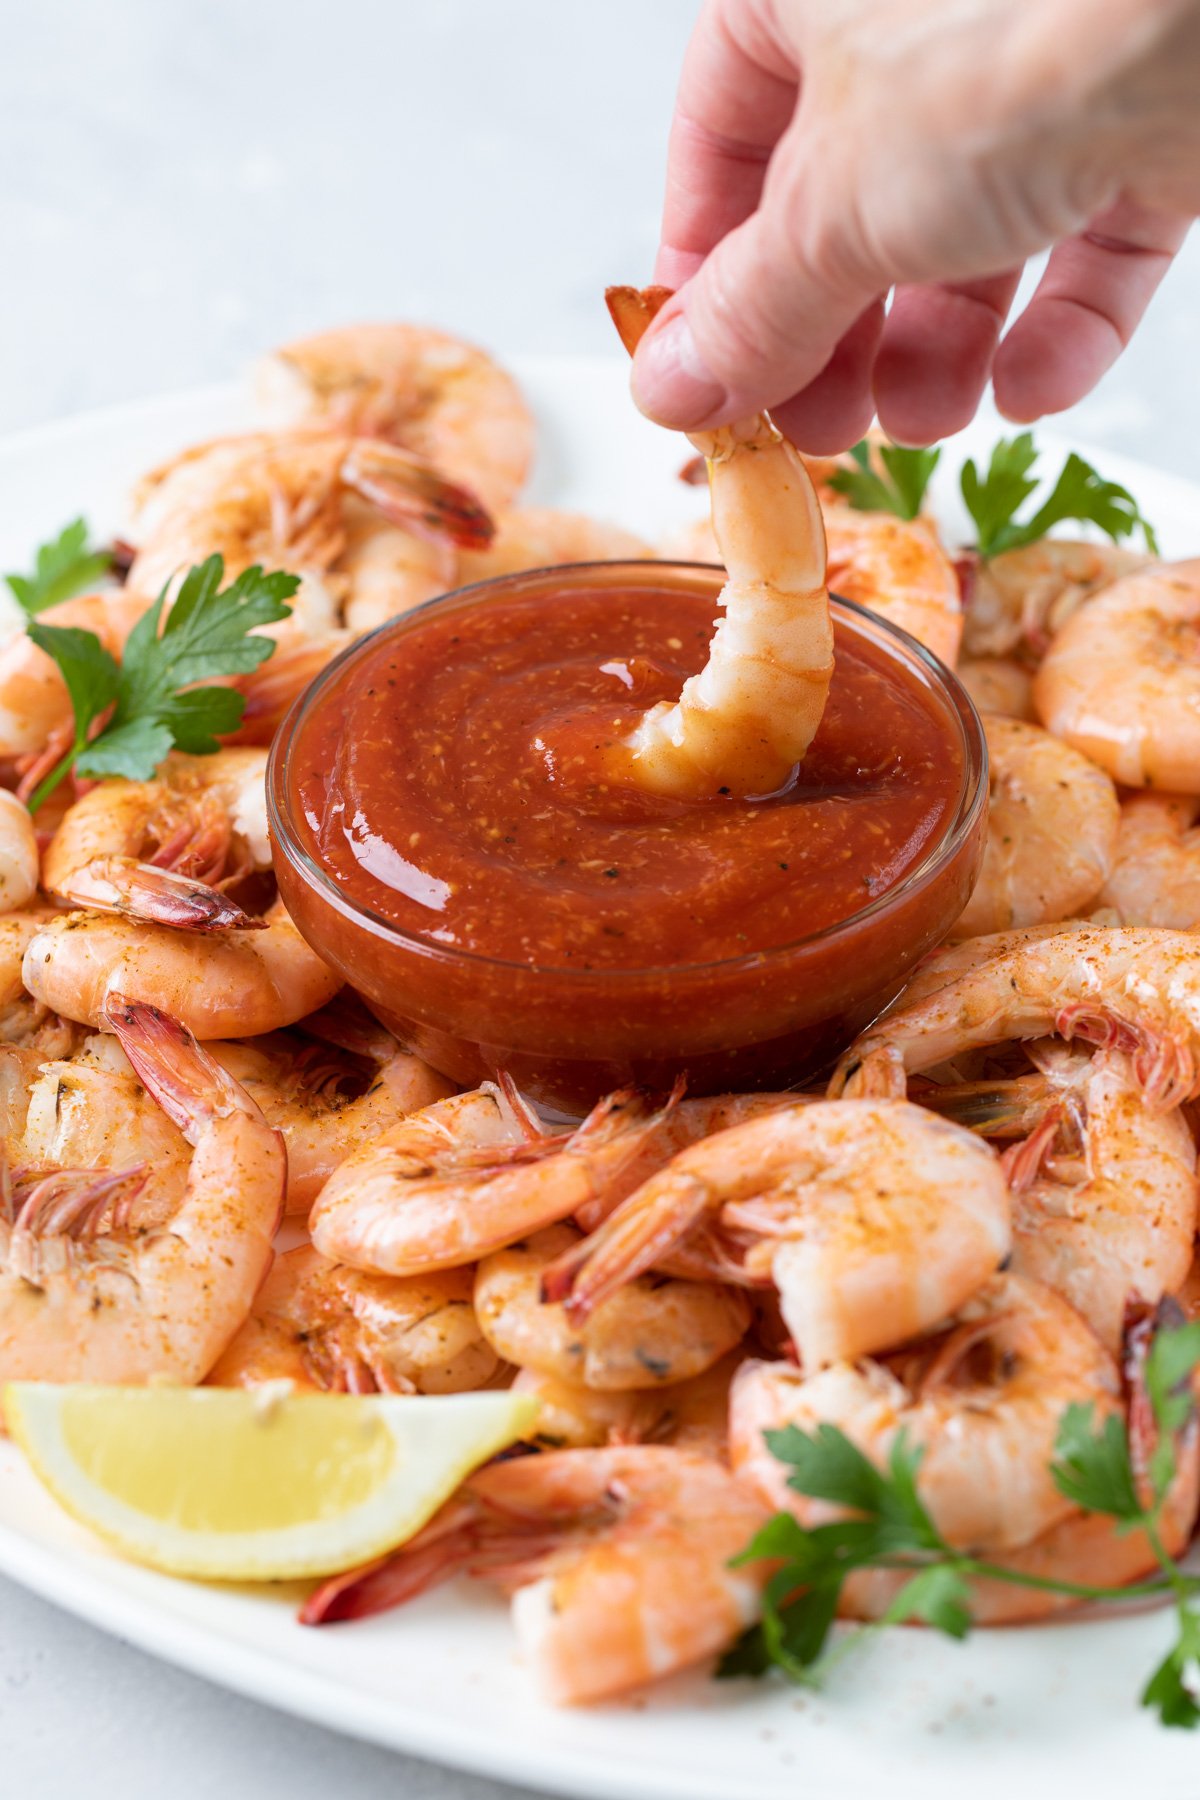 Dipping a shrimp into a bowl of homemade cocktail sauce on a white platter with shrimp.